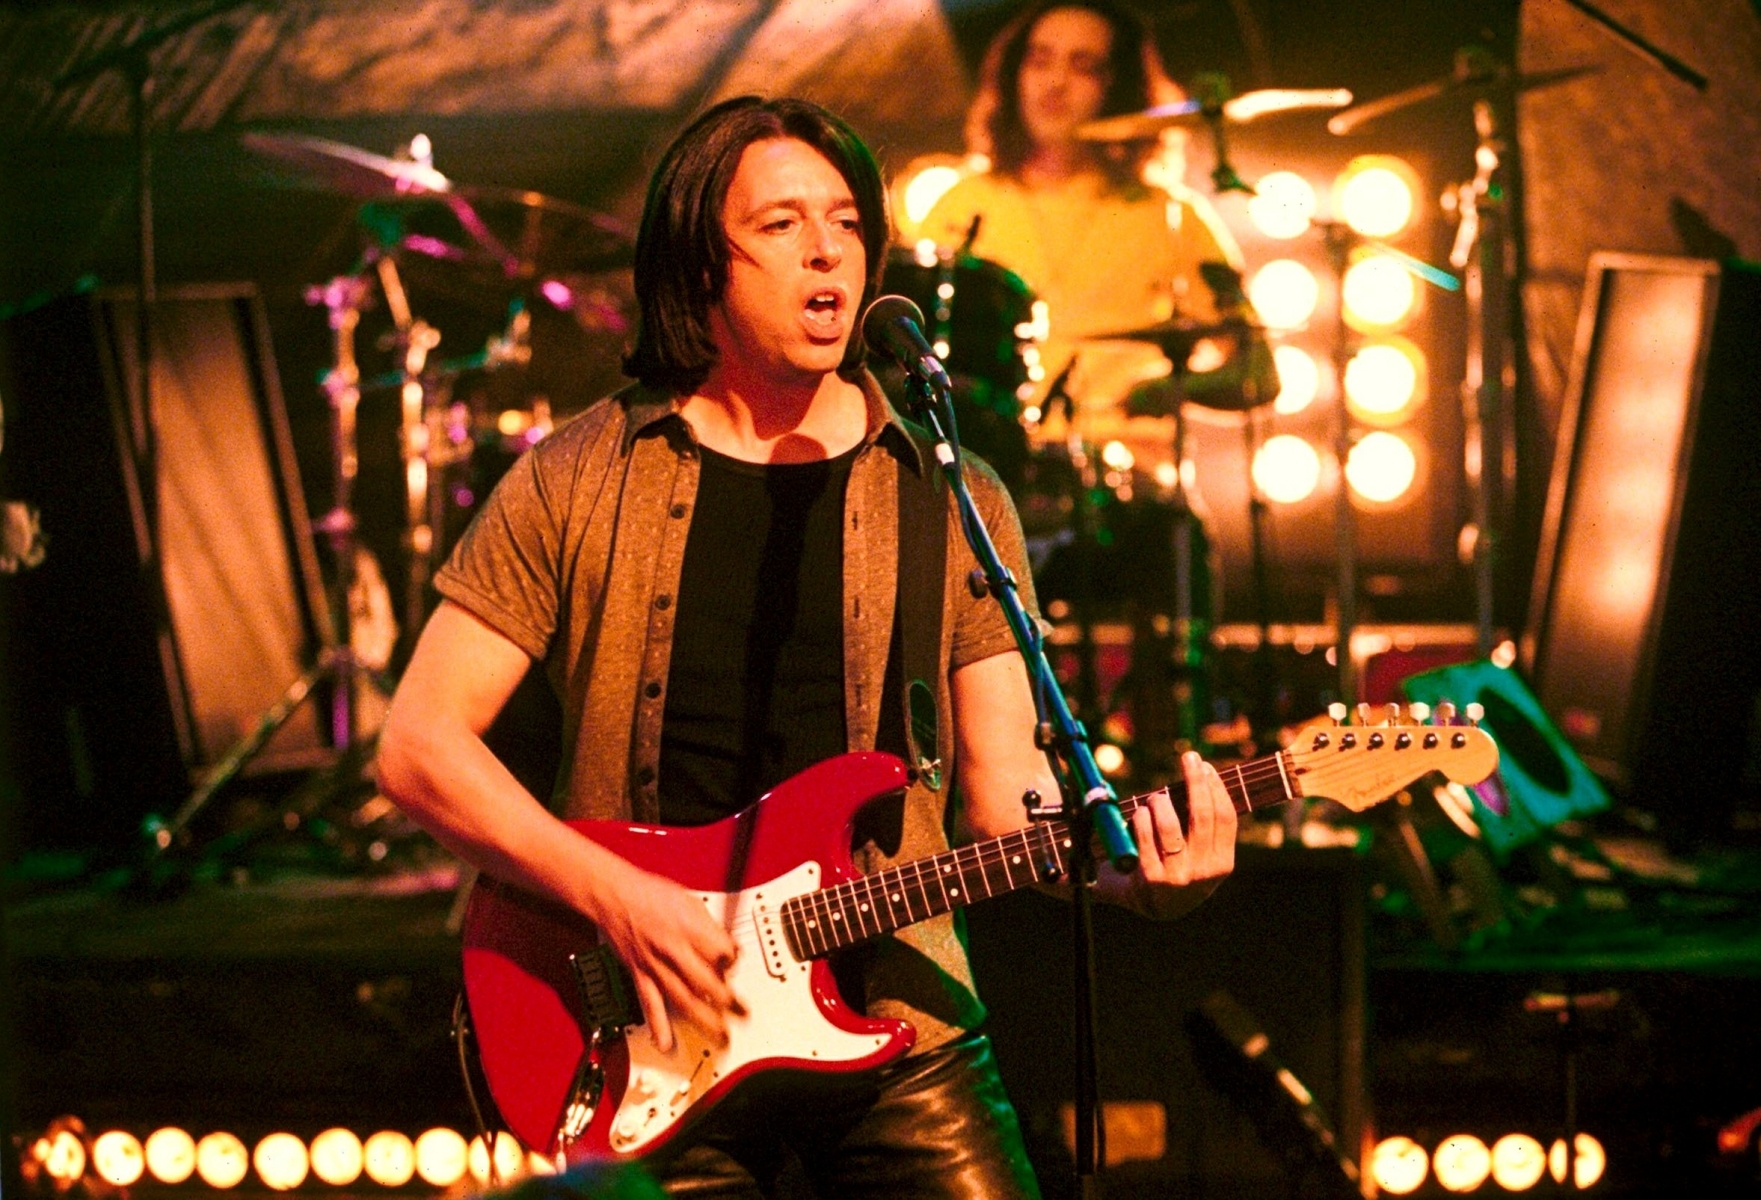 <p><a href="https://www.youtube.com/watch?v=crDss92HqVo" class="CMY_Link CMY_Valid">Orzabal said</a> that the early success of Tears For Fears hit him hard and was often difficult to navigate, but his years as a solo artist became “a thoroughly amazing time” where he felt more comfortable making records. Working alone allowed him to experiment and find his own musical voice without expectations.</p>